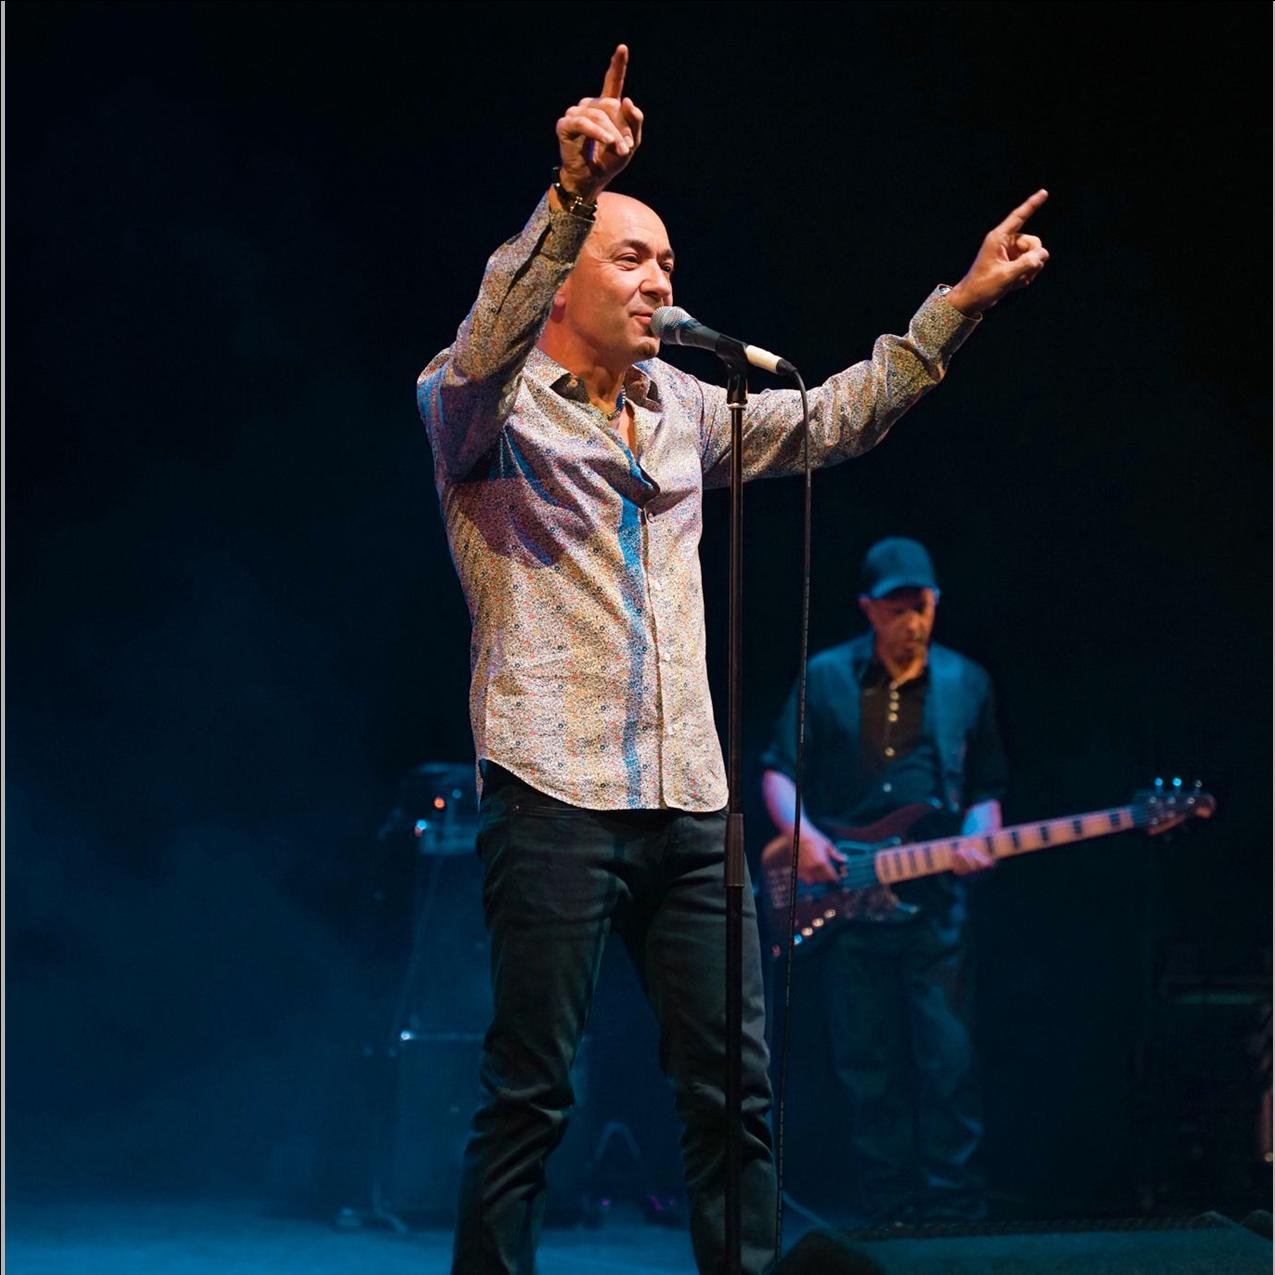 Image name Kenny Thomas Him Tour at Grand Opera House York York the 11 image from the post Kenny Thomas - Him Tour at Grand Opera House, York, York in Yorkshire.com.